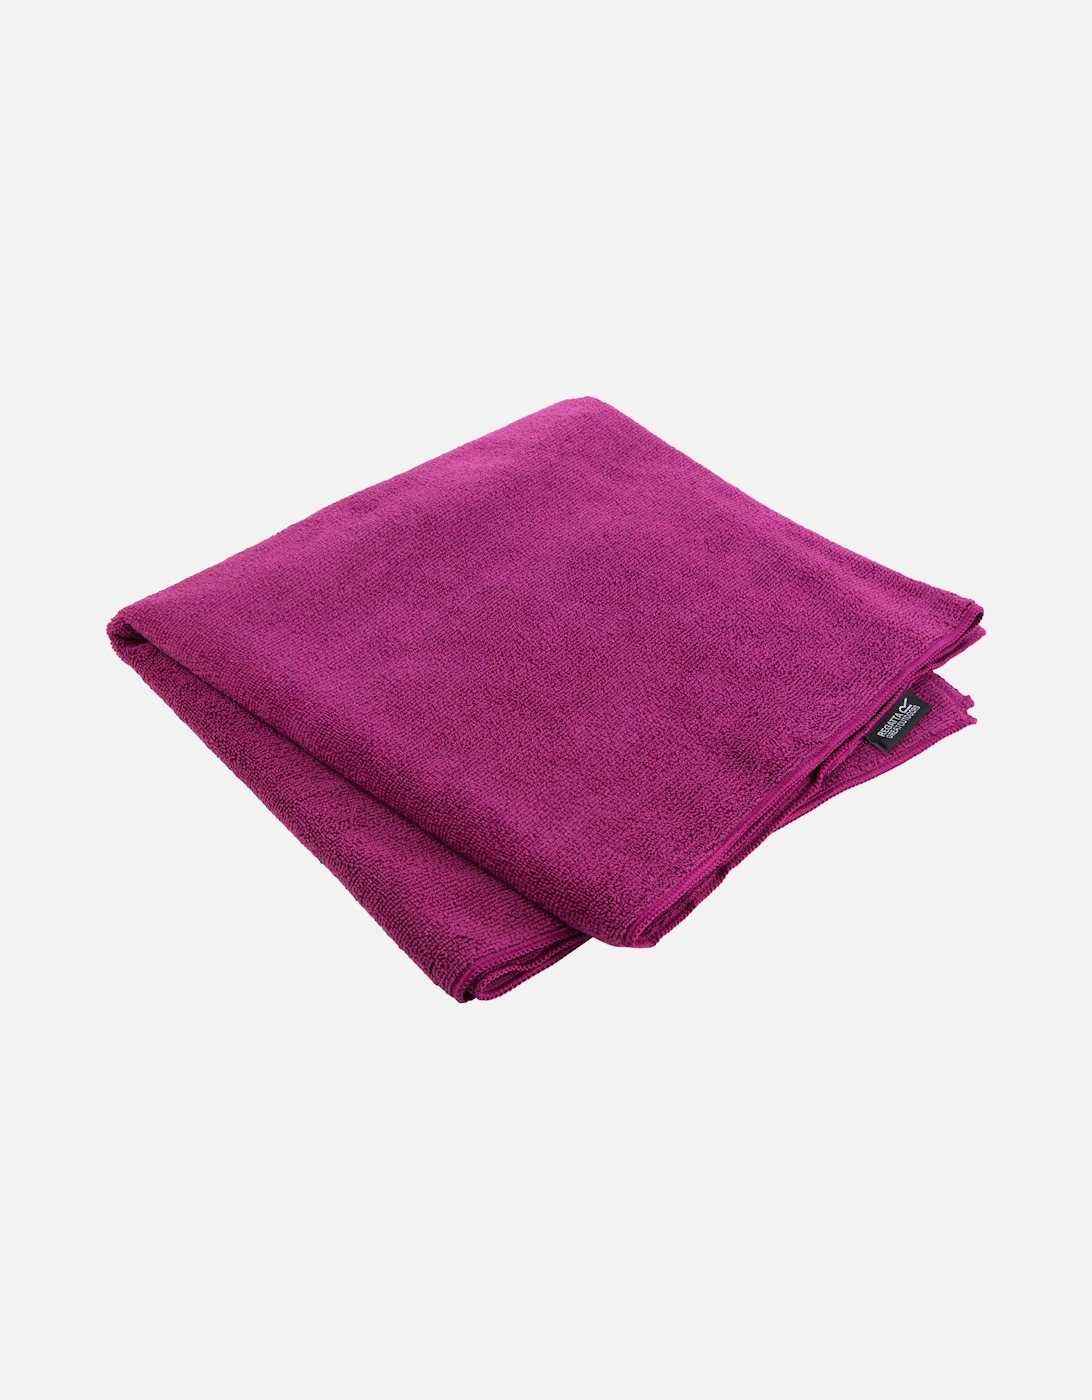 Great Outdoors Lightweight Giant Compact Travel Towel, 3 of 2